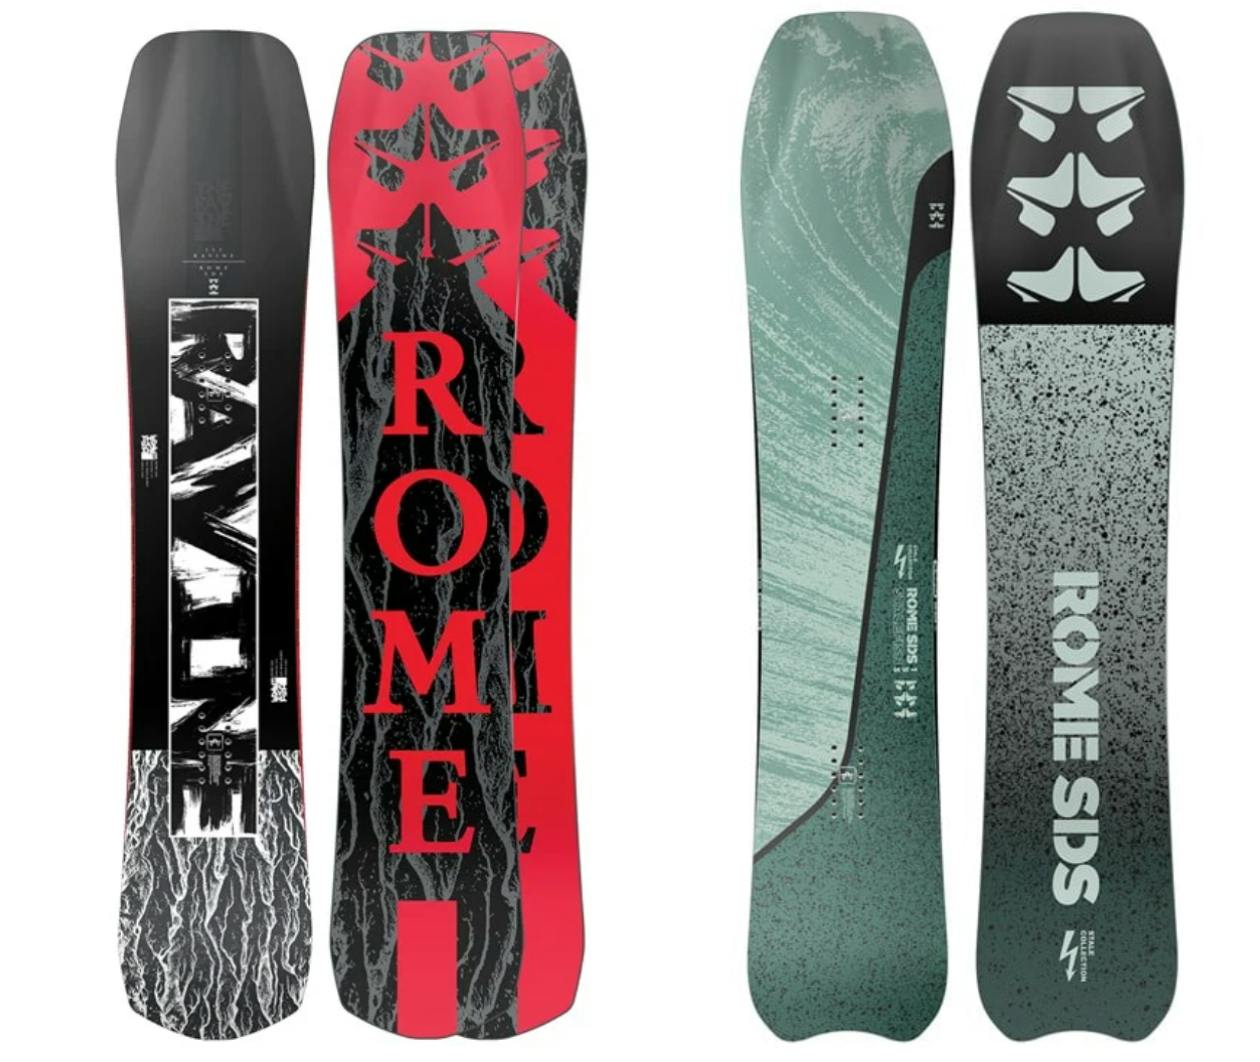 The Rome Ravine snowboard (left) and the Rome Stalefish snowboard (right).